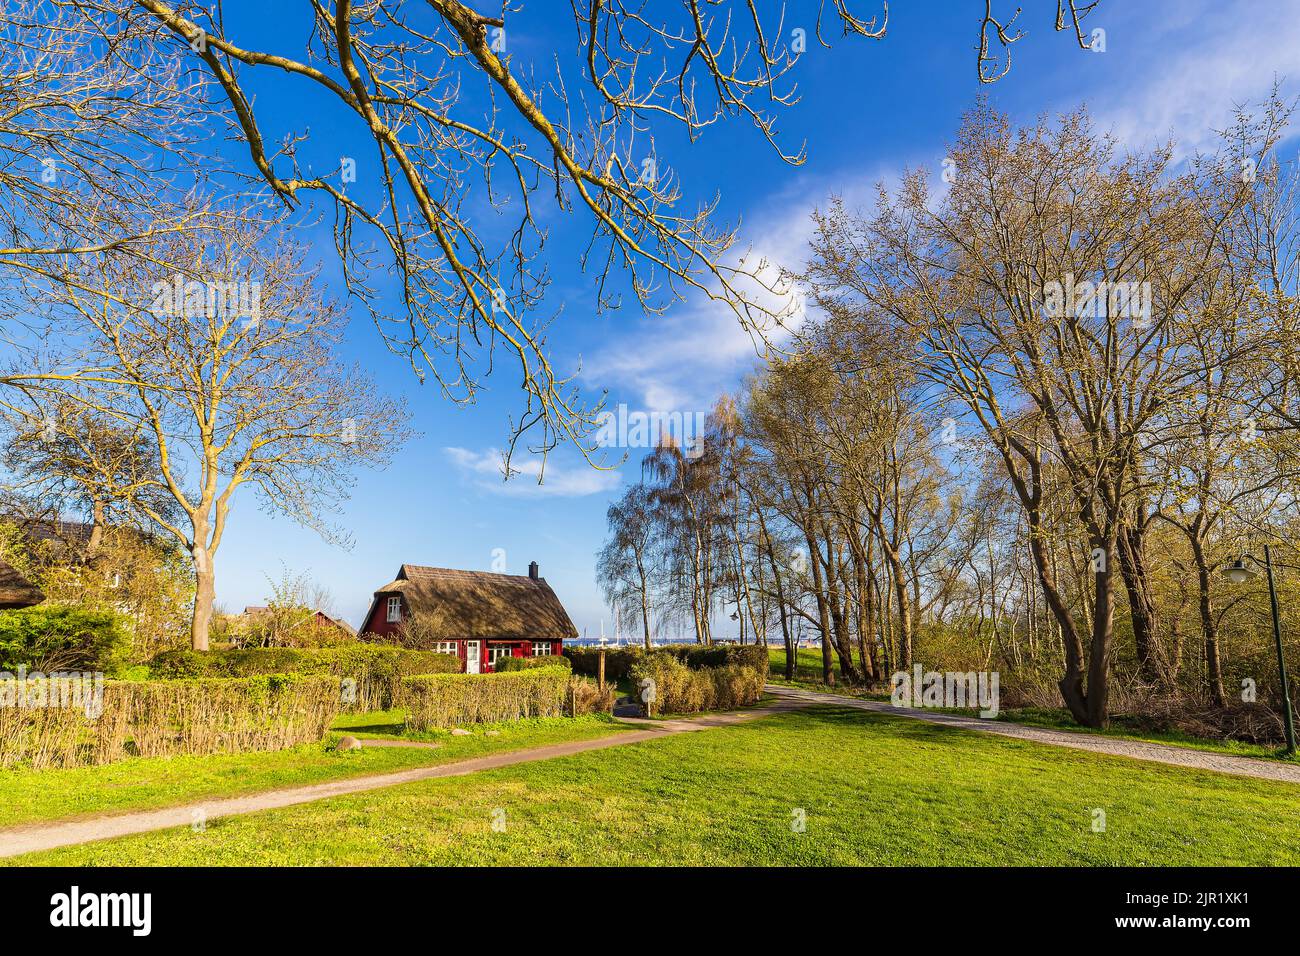 Historical building with thatched roof in Kloster on the island Hiddensee, Germany. Stock Photo